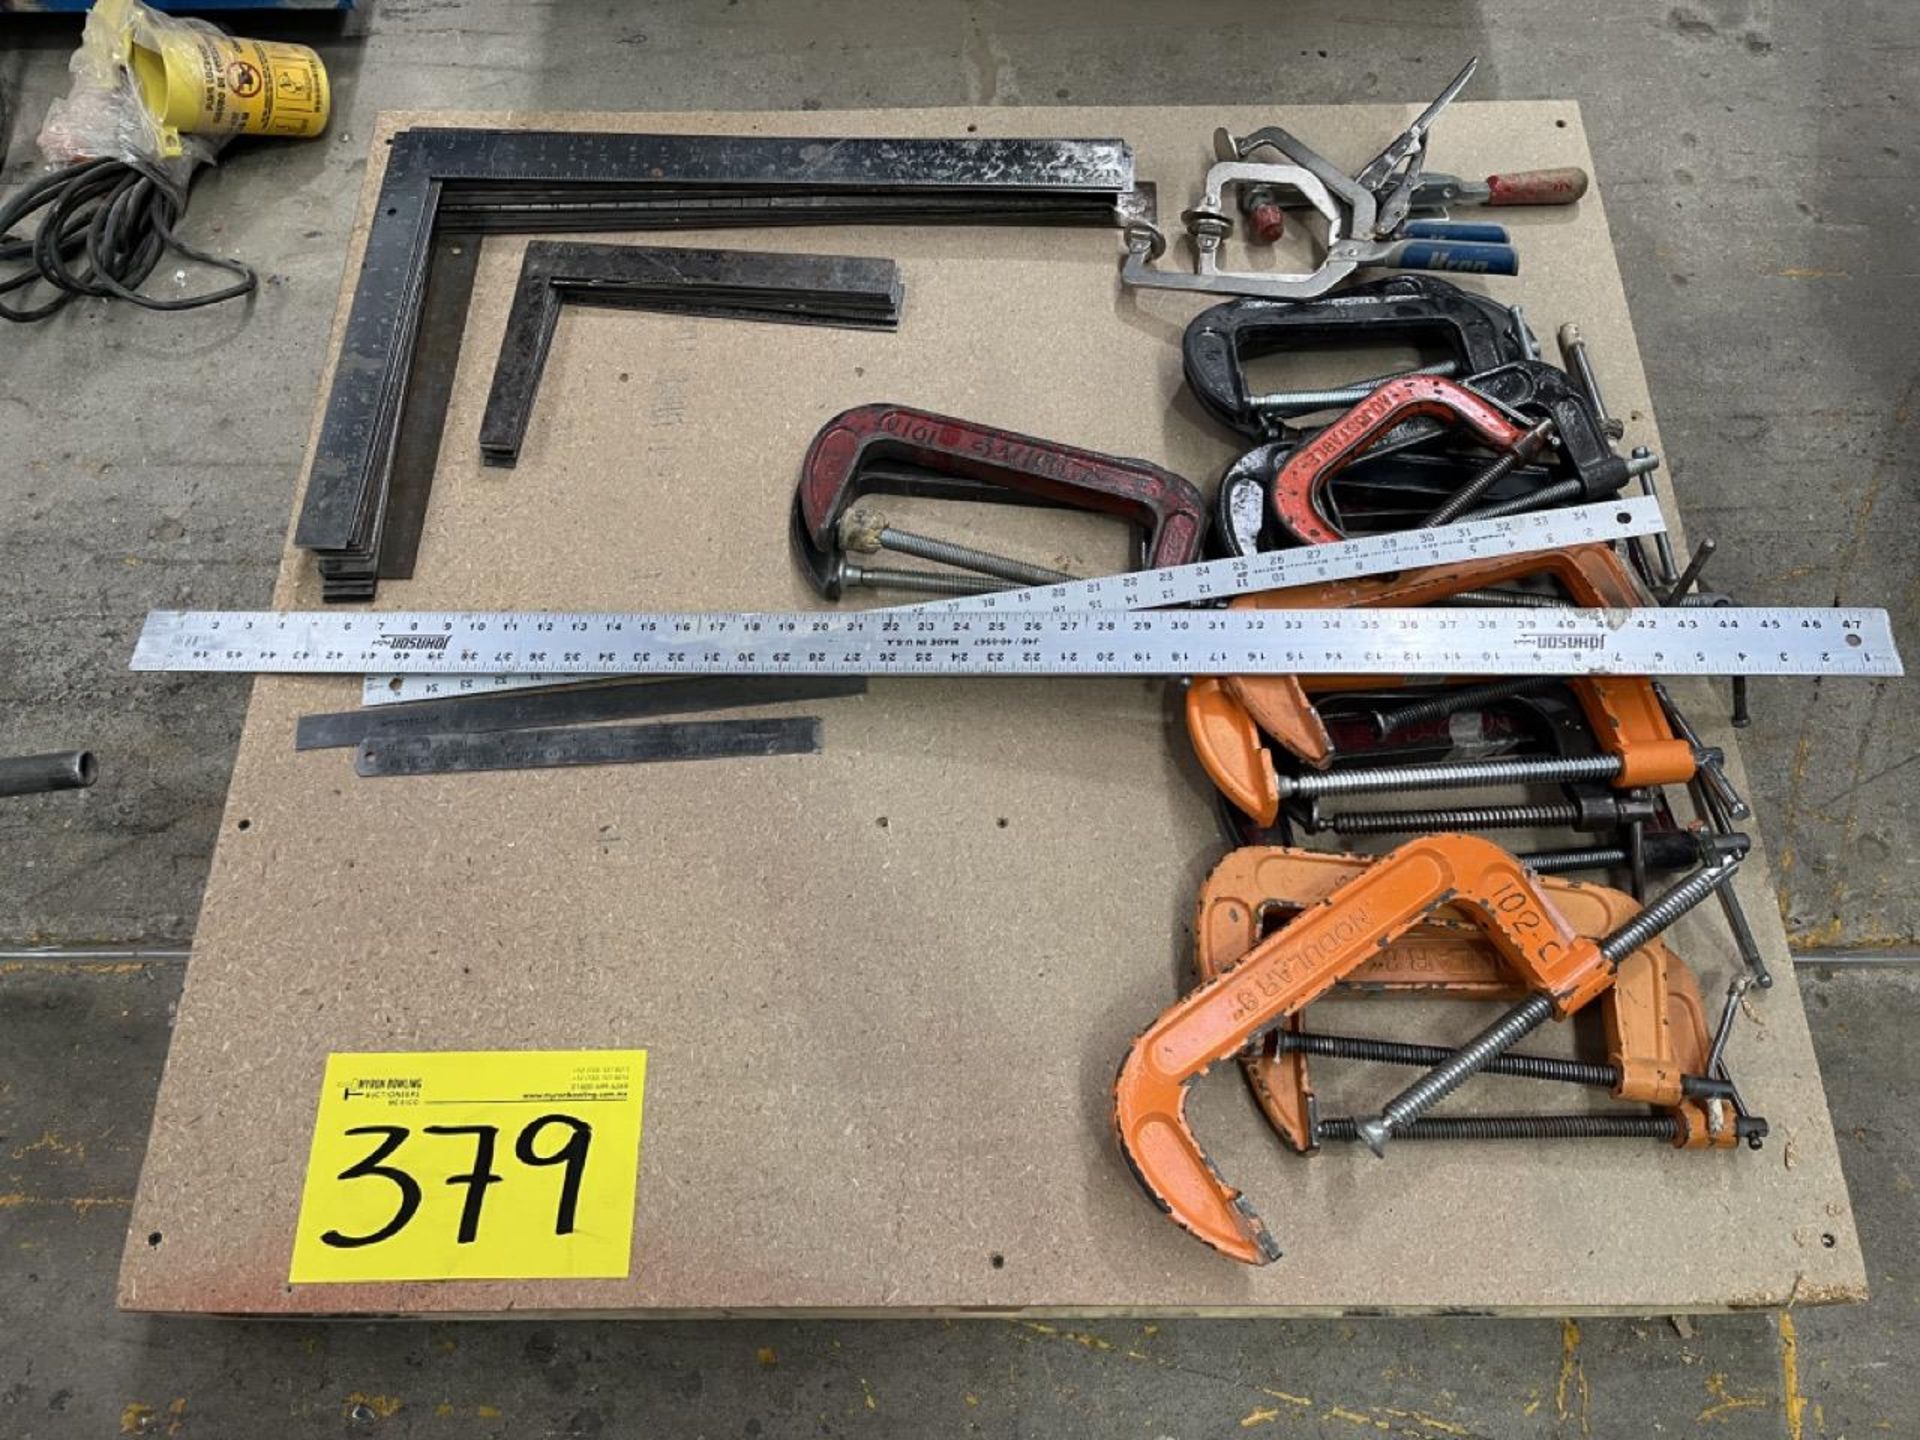 Lot of tool contains: metal squares and rulers, bench presses of different sizes; approximately 45